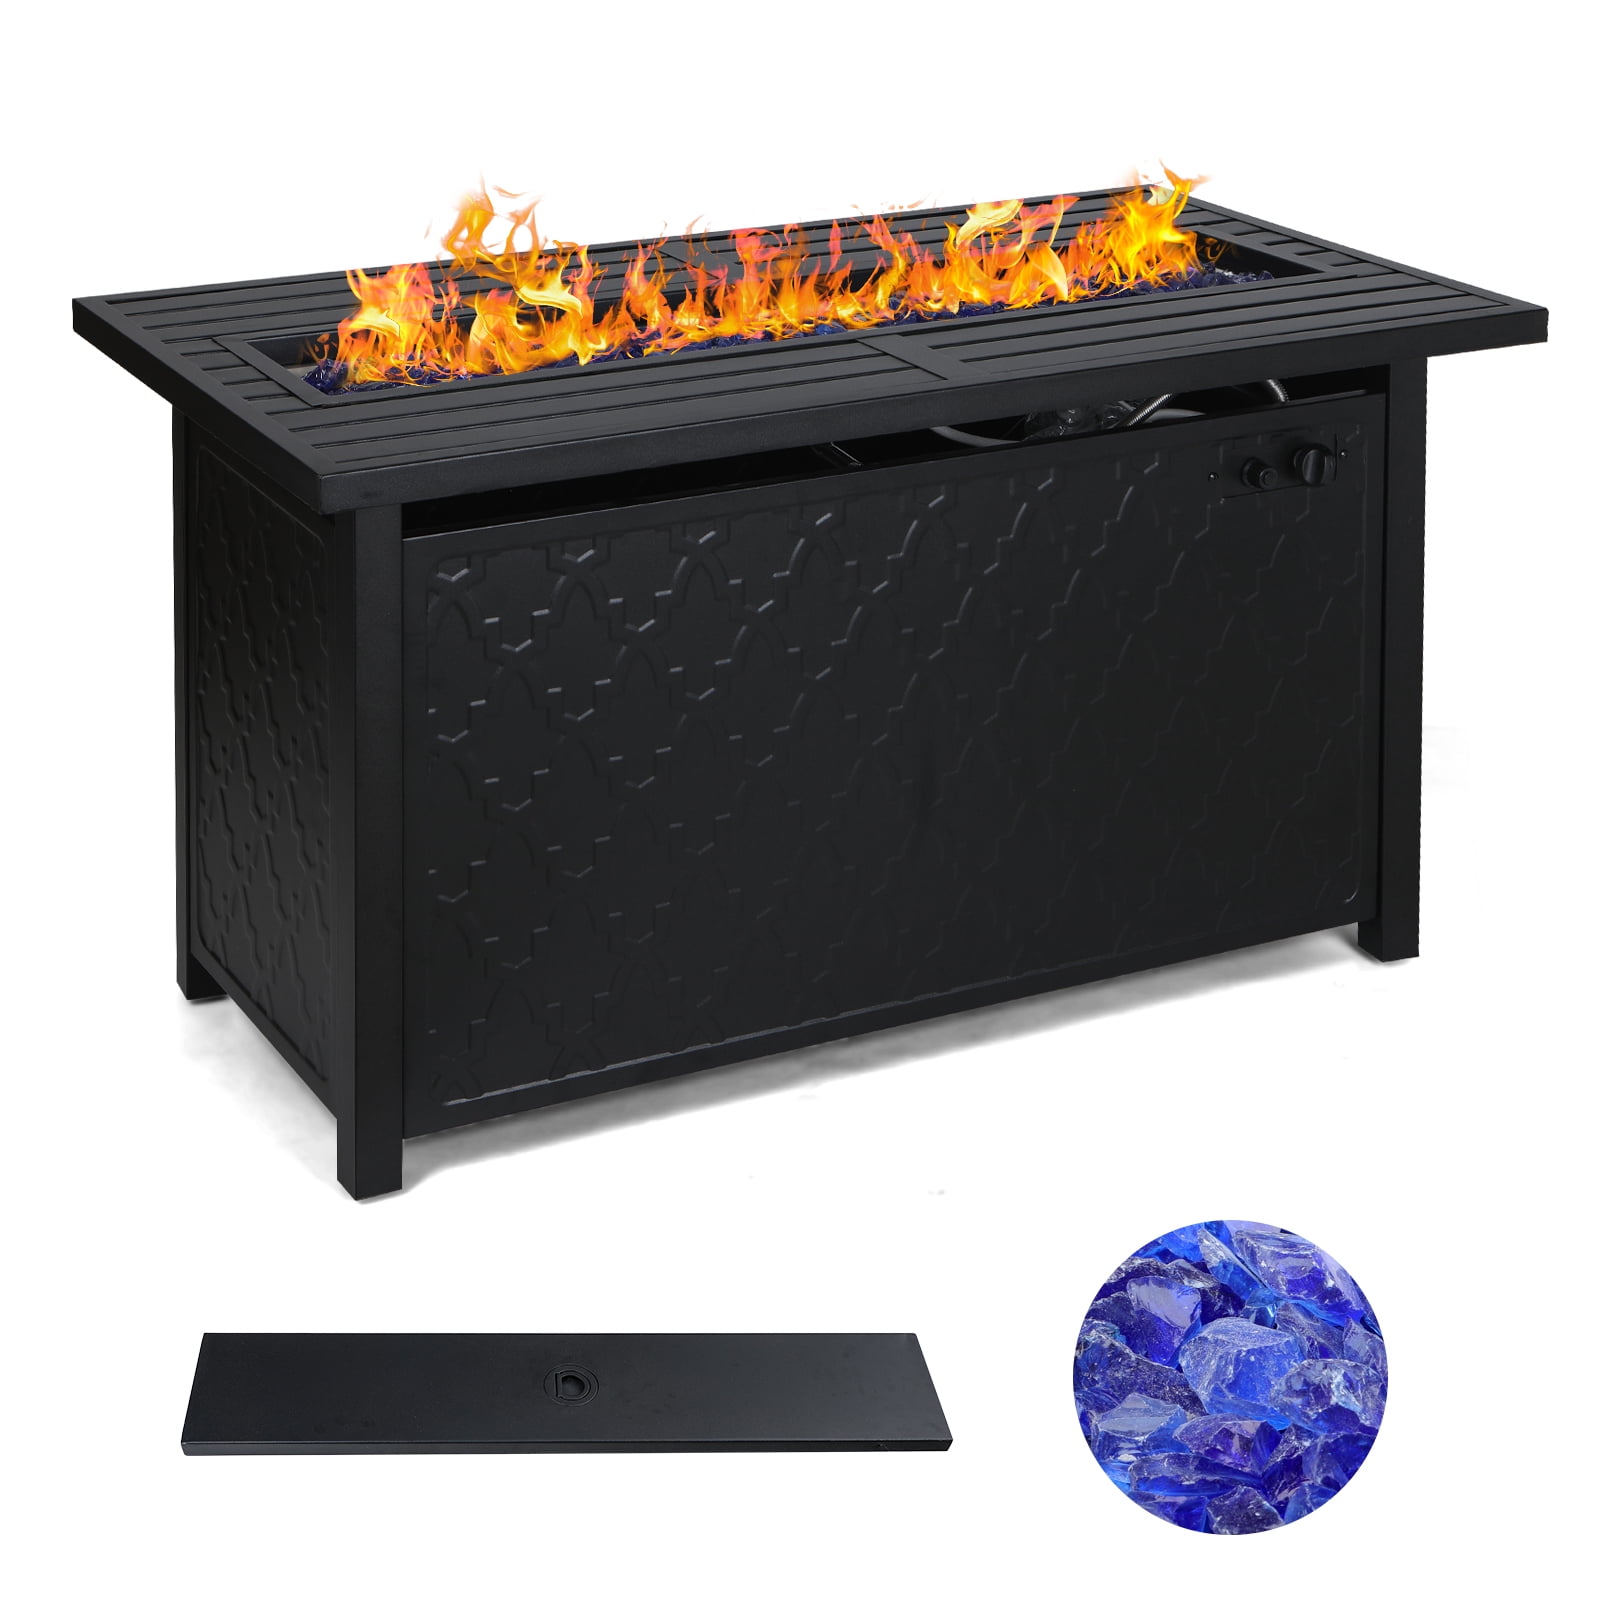 MFSTUDIO 45” Outdoor Rectangular Gas Fire Pit Table，50000 BTU Propane Iron Plate Embossing Fire Table with Lid and Blue Glass for Patio,Backyard and Balcony,Black 